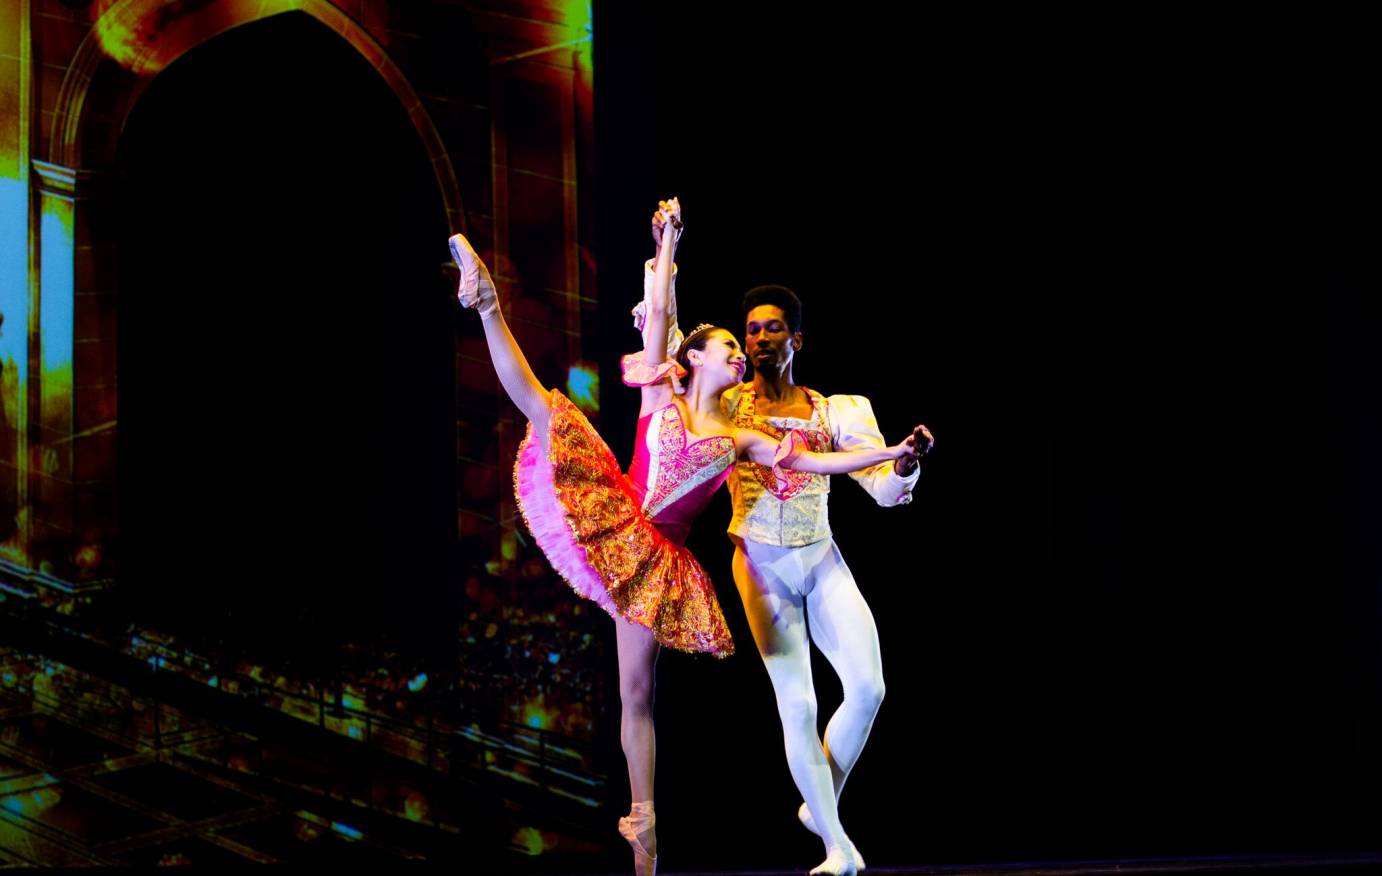 Expert ballet couple in candy colored costumes